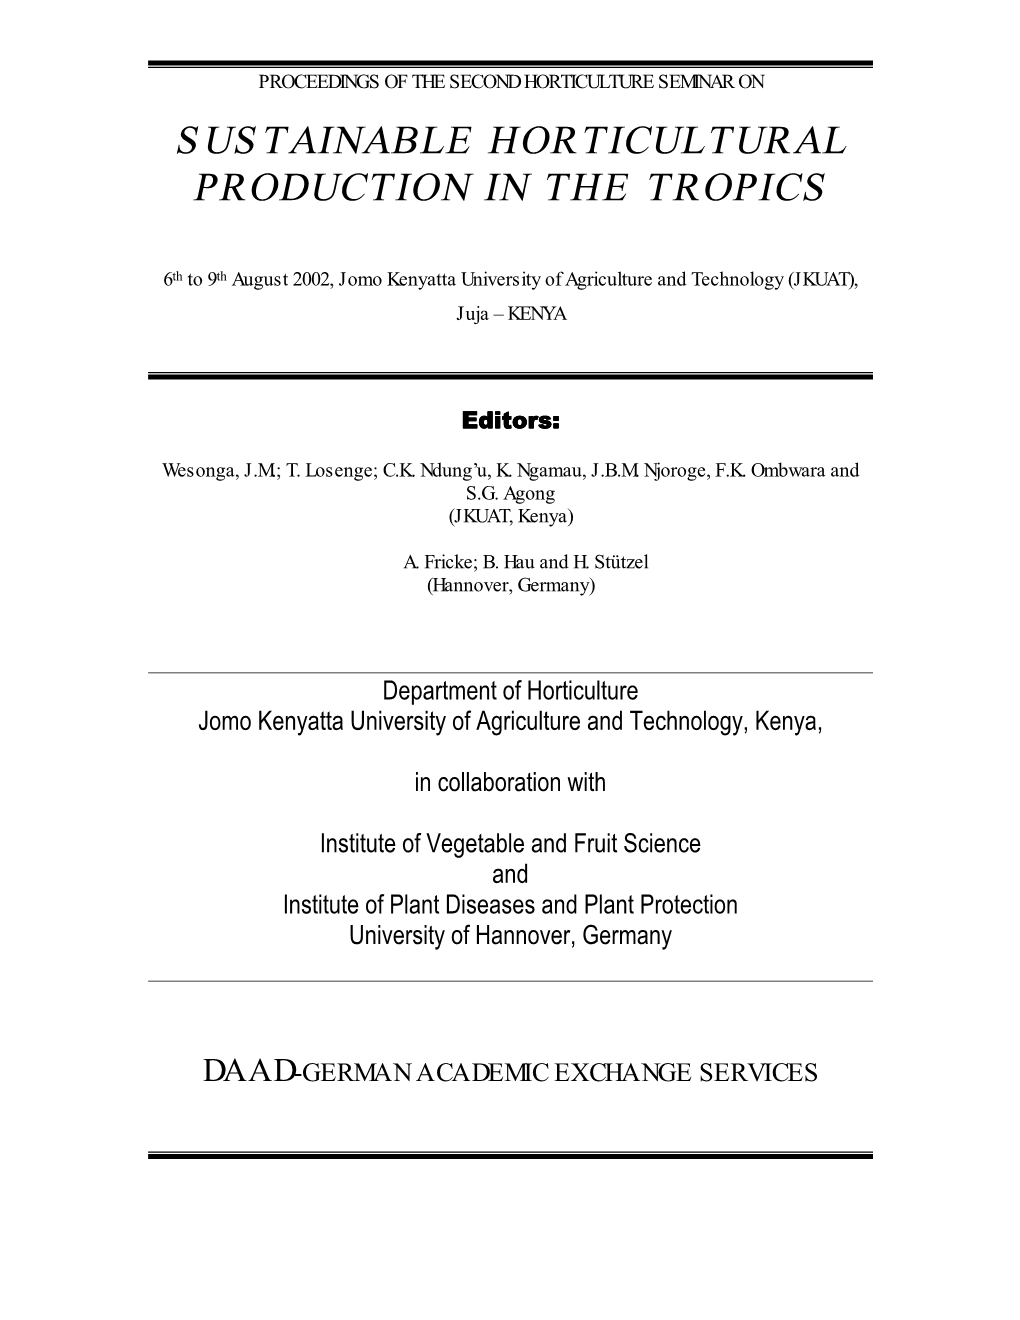 Sustainable Horticulture Production in the Tropics Was Held Between 3Rd and 6Th October 2001